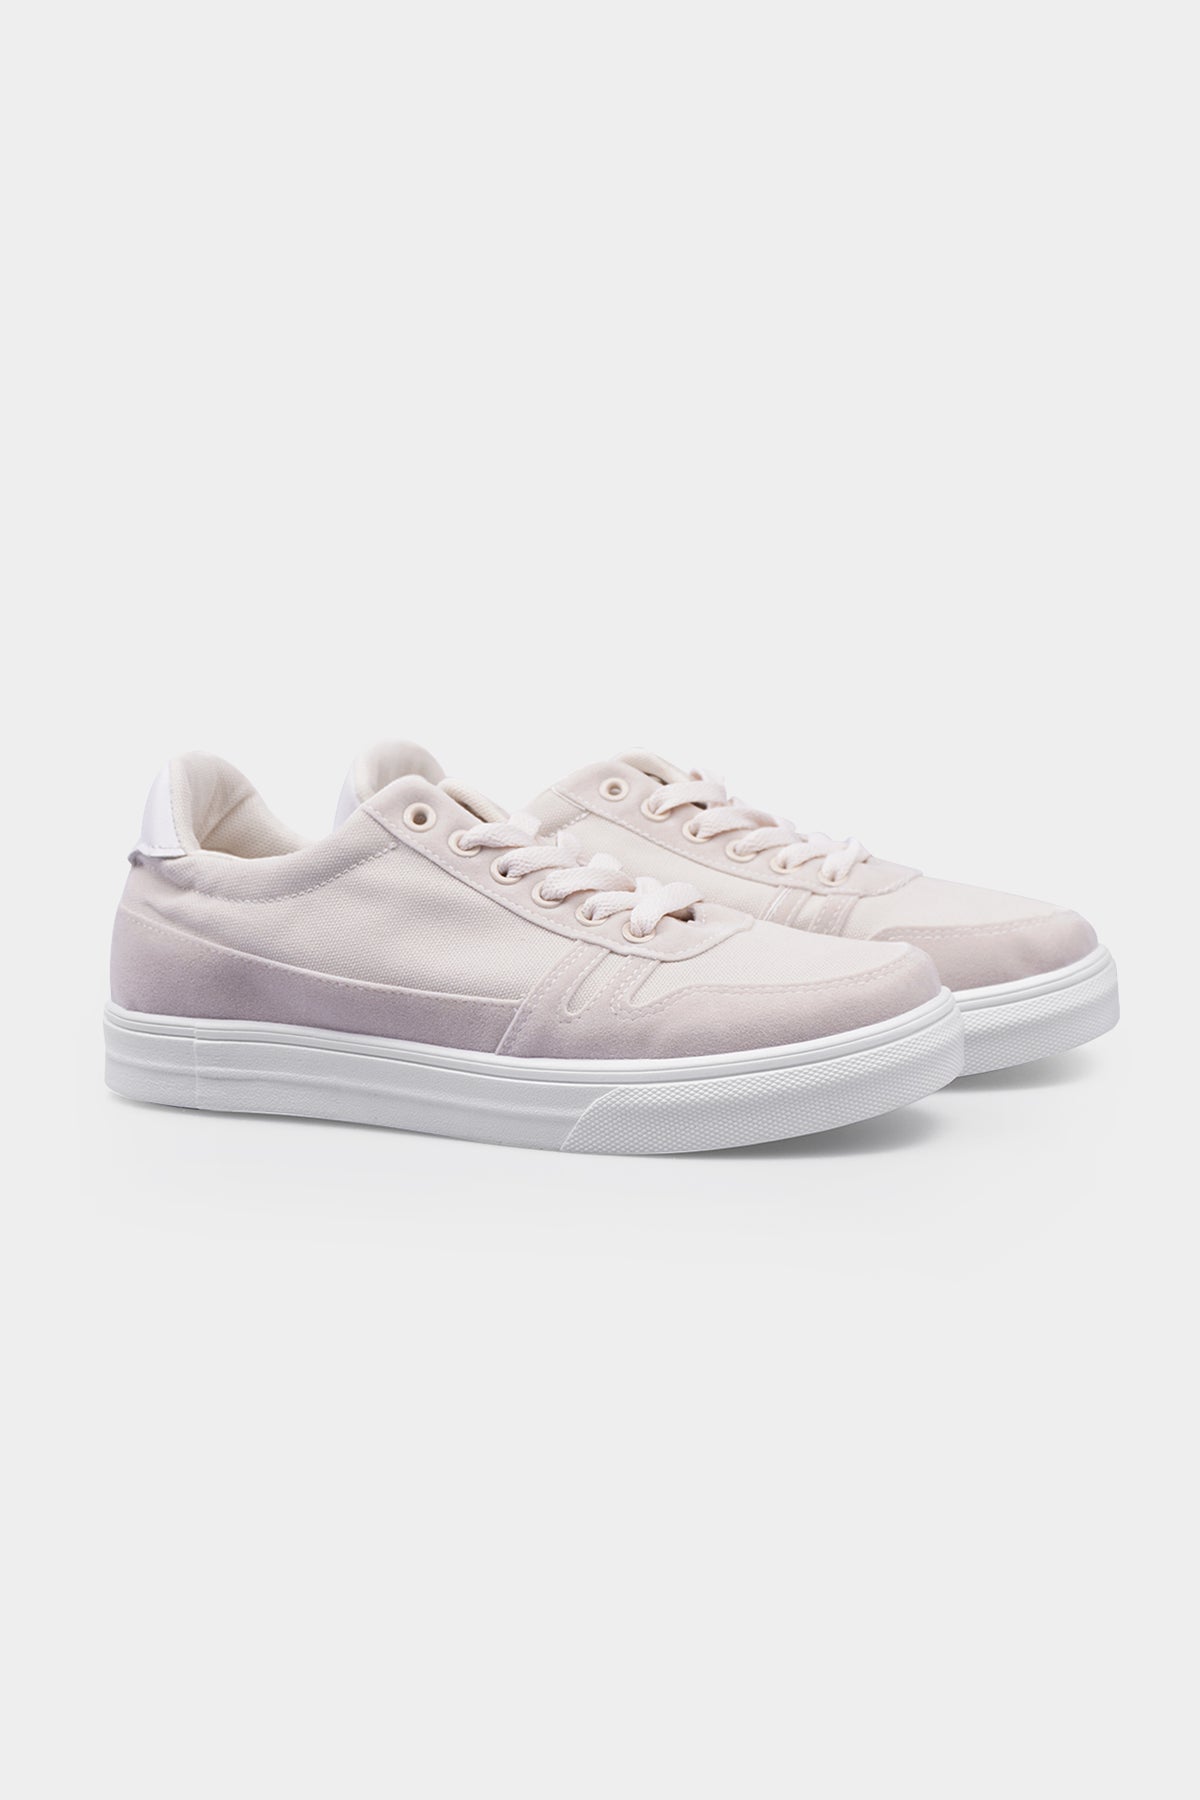 penshoppe lace up sneakers